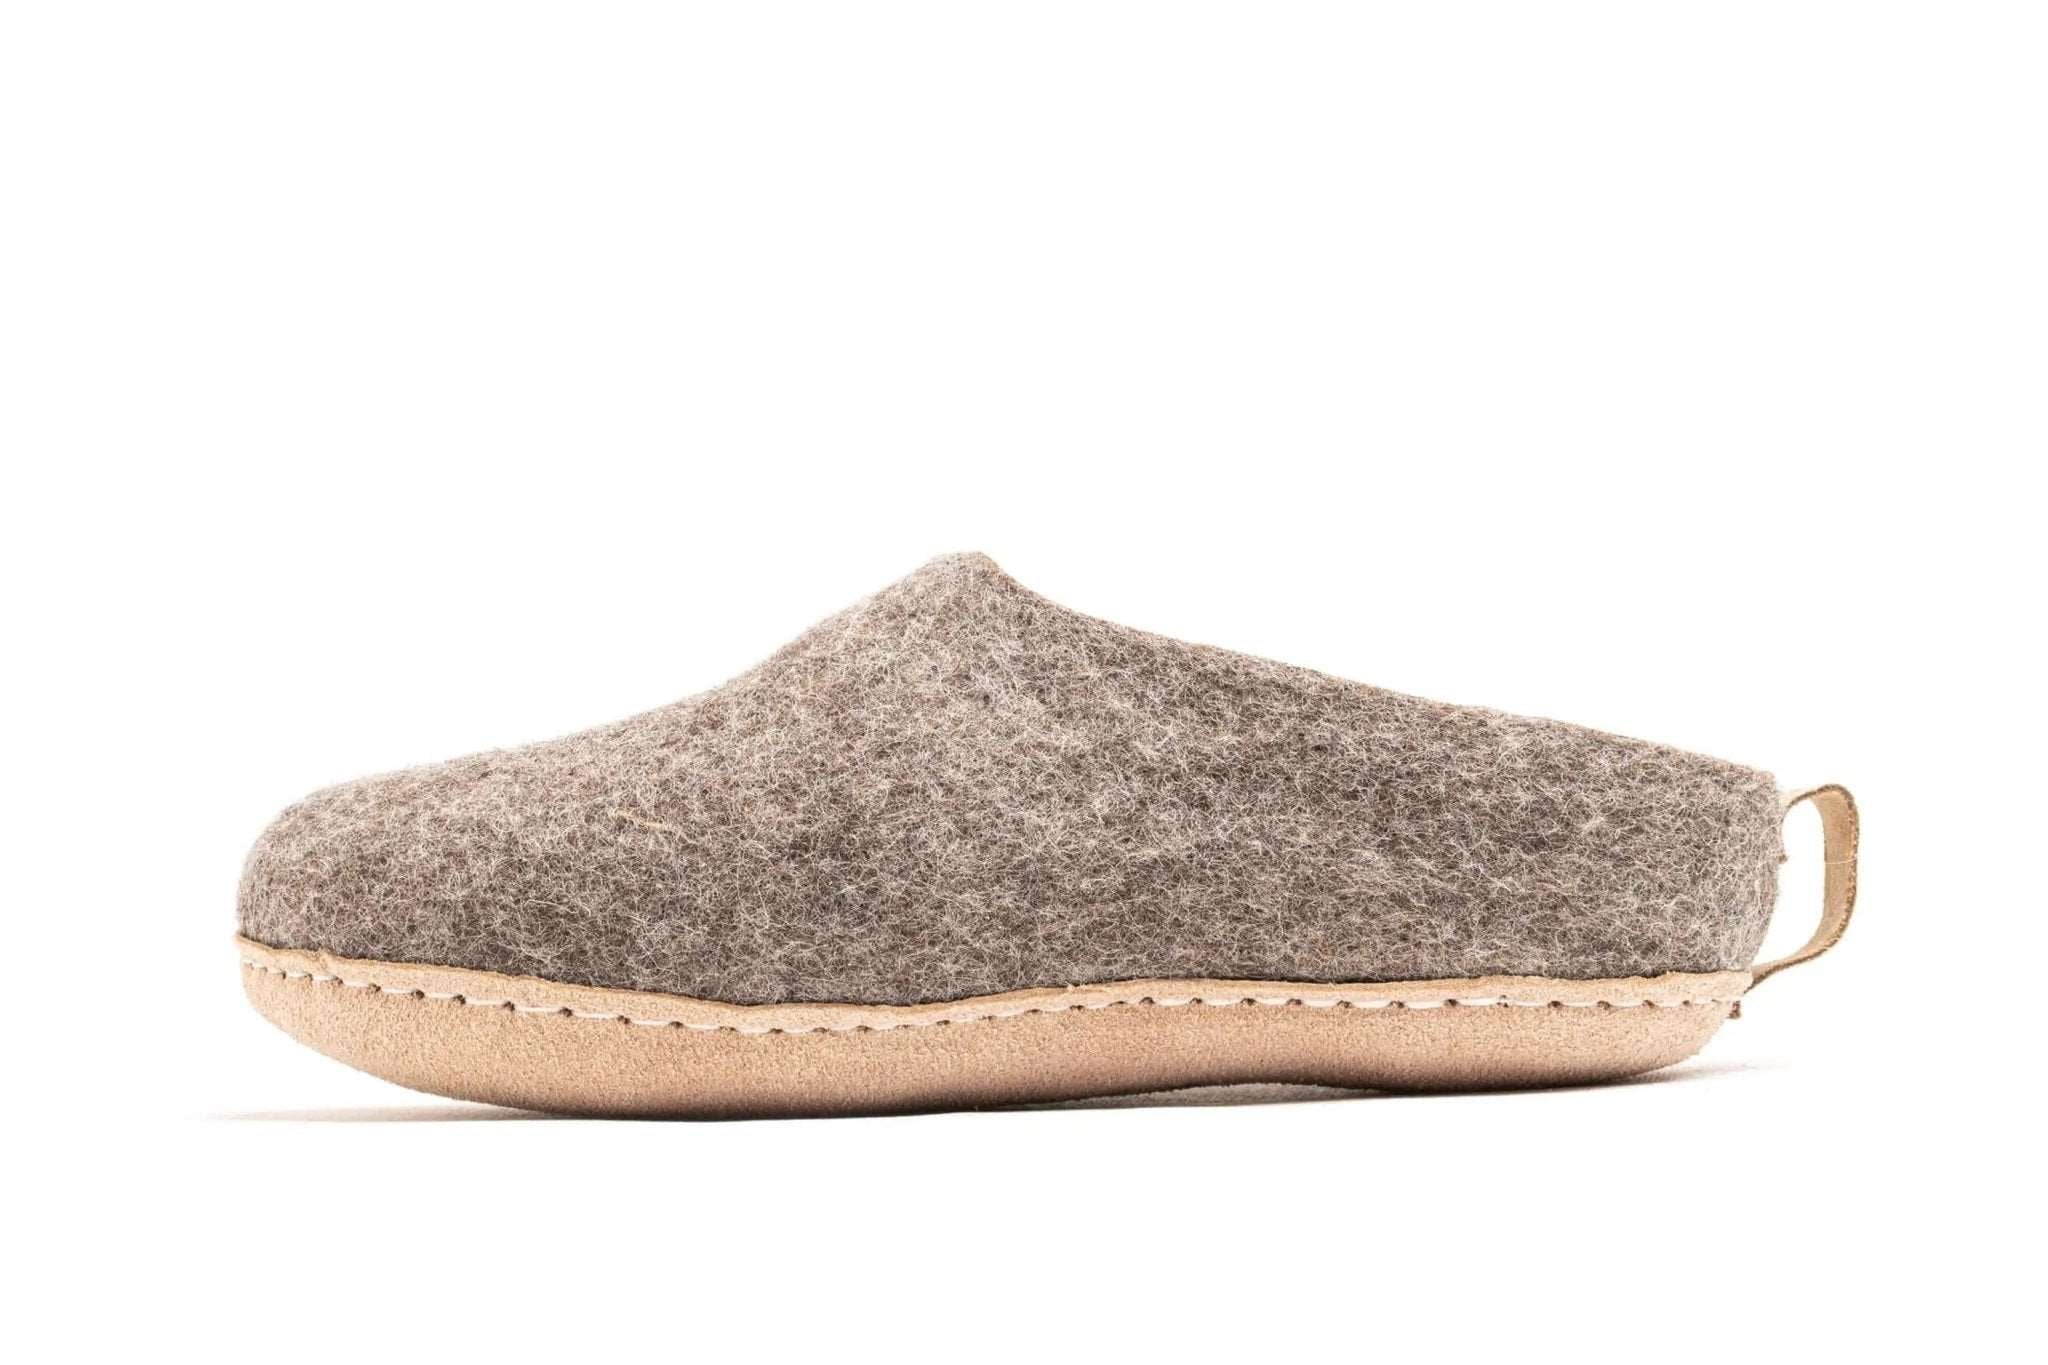 Indoor Open Heel Slippers With Leather Sole - Natural Brown - Woollyes